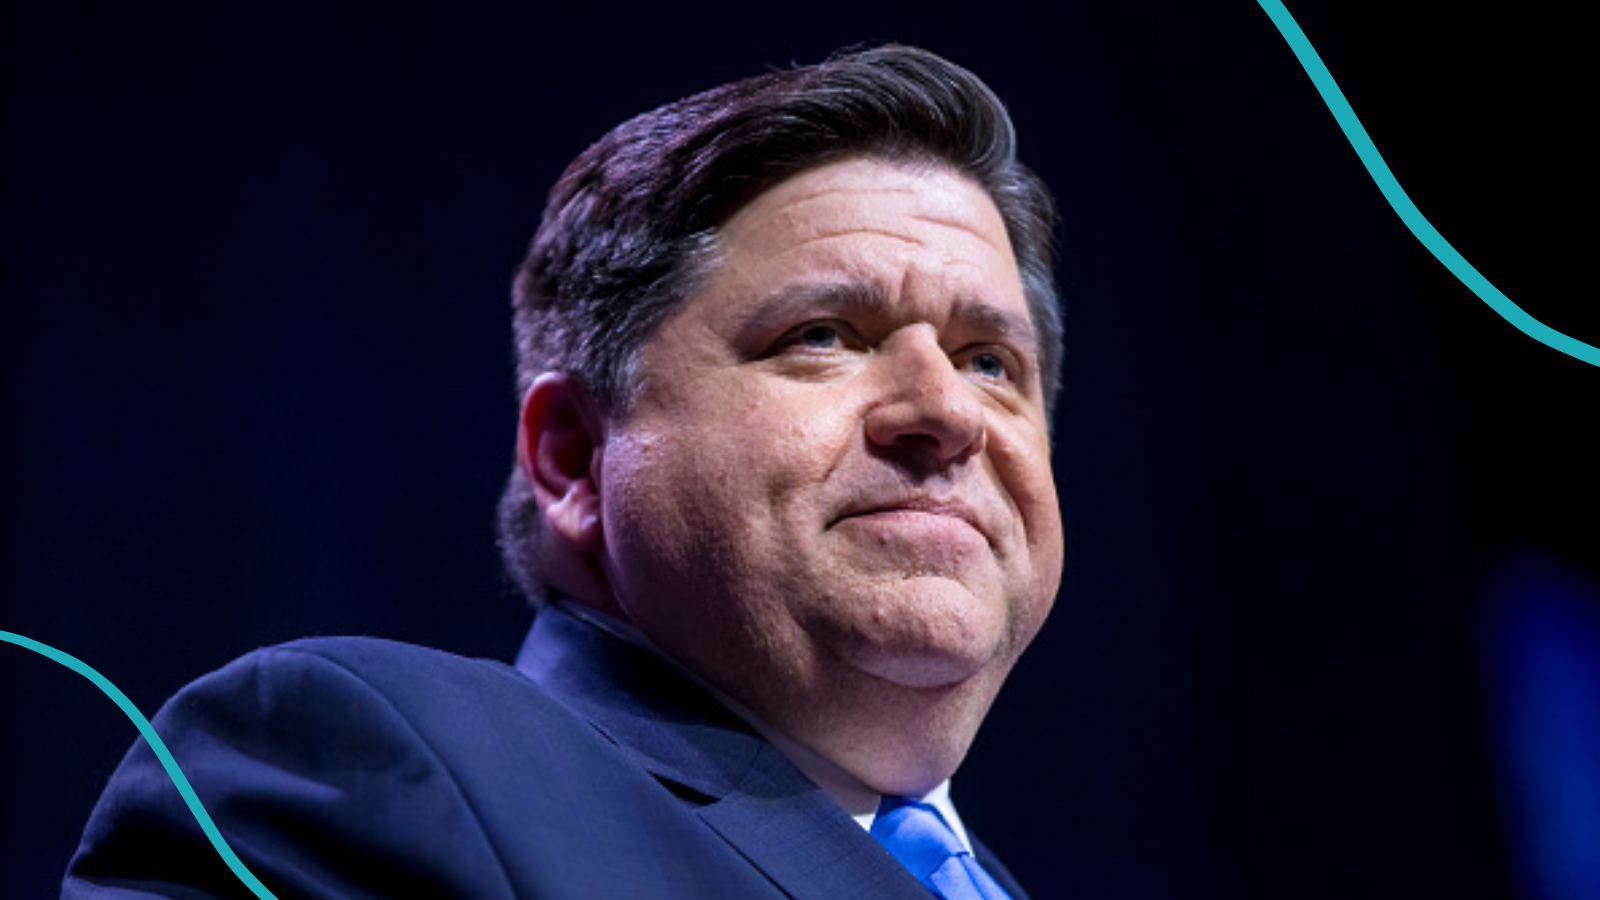 Governor JB Pritzker who recently signed Illinois law banning book bans